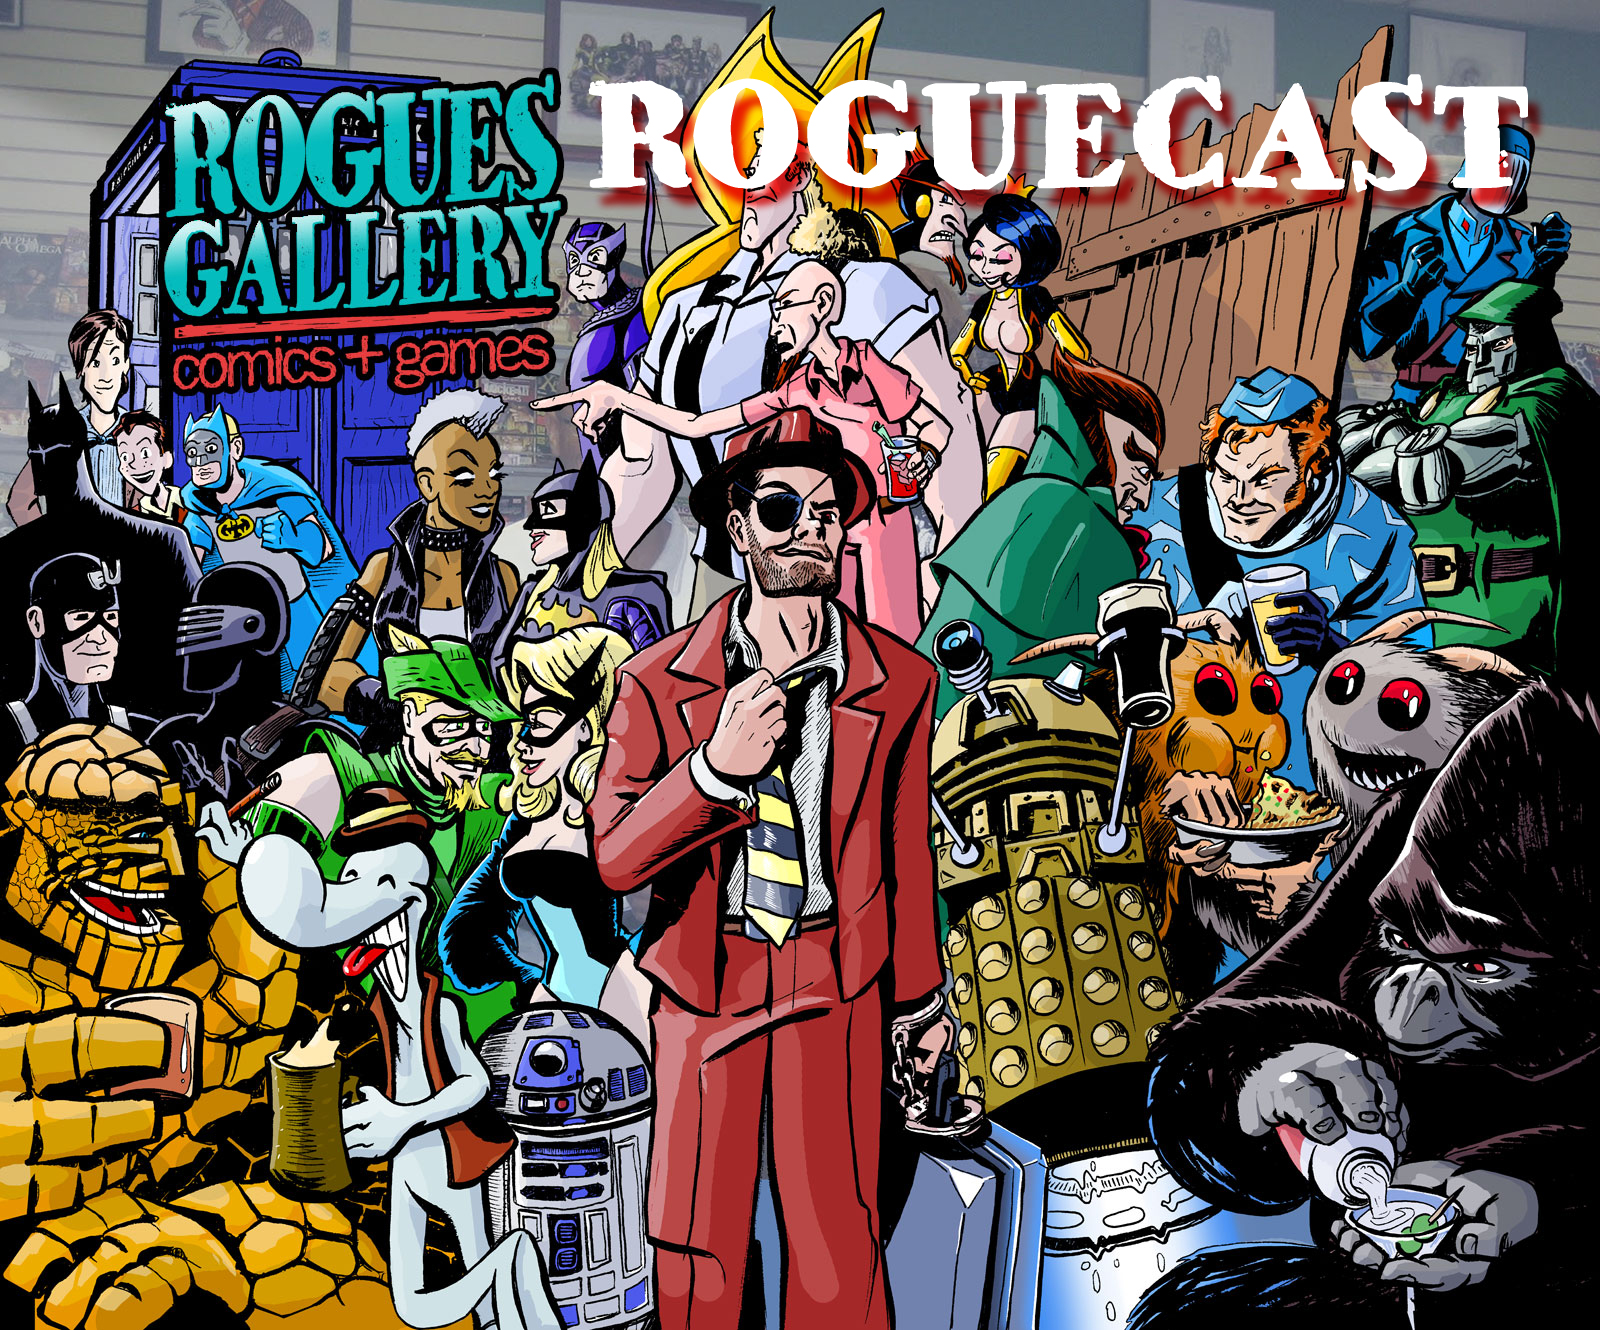 Rogues Gallery #4